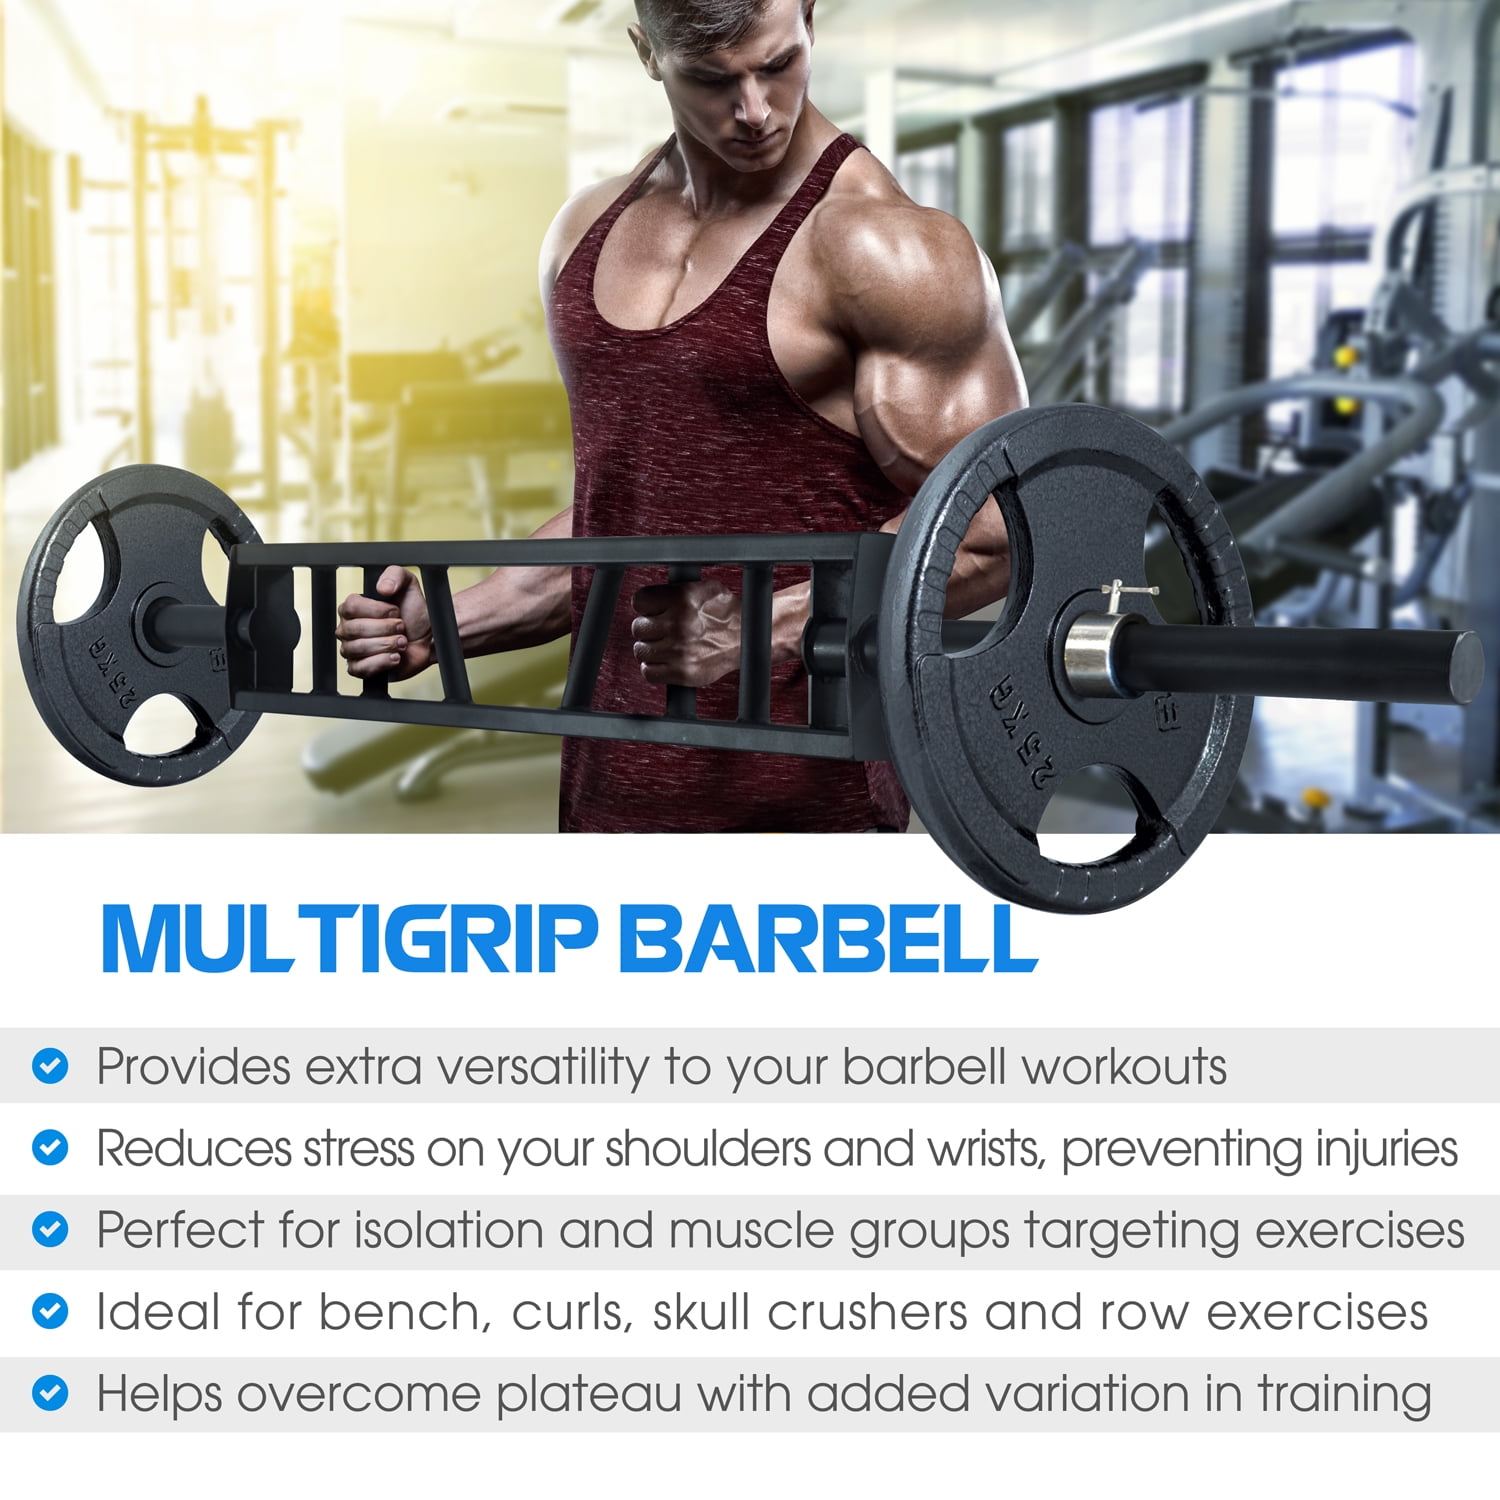 34 Solid Olympic Triceps Bar Building Up a Good Physique JNN Barbell Bar for Squats Shrugs Flat or Raised Handles Dumbbell Bar wtih Barbell Spring Clip Deadlifts